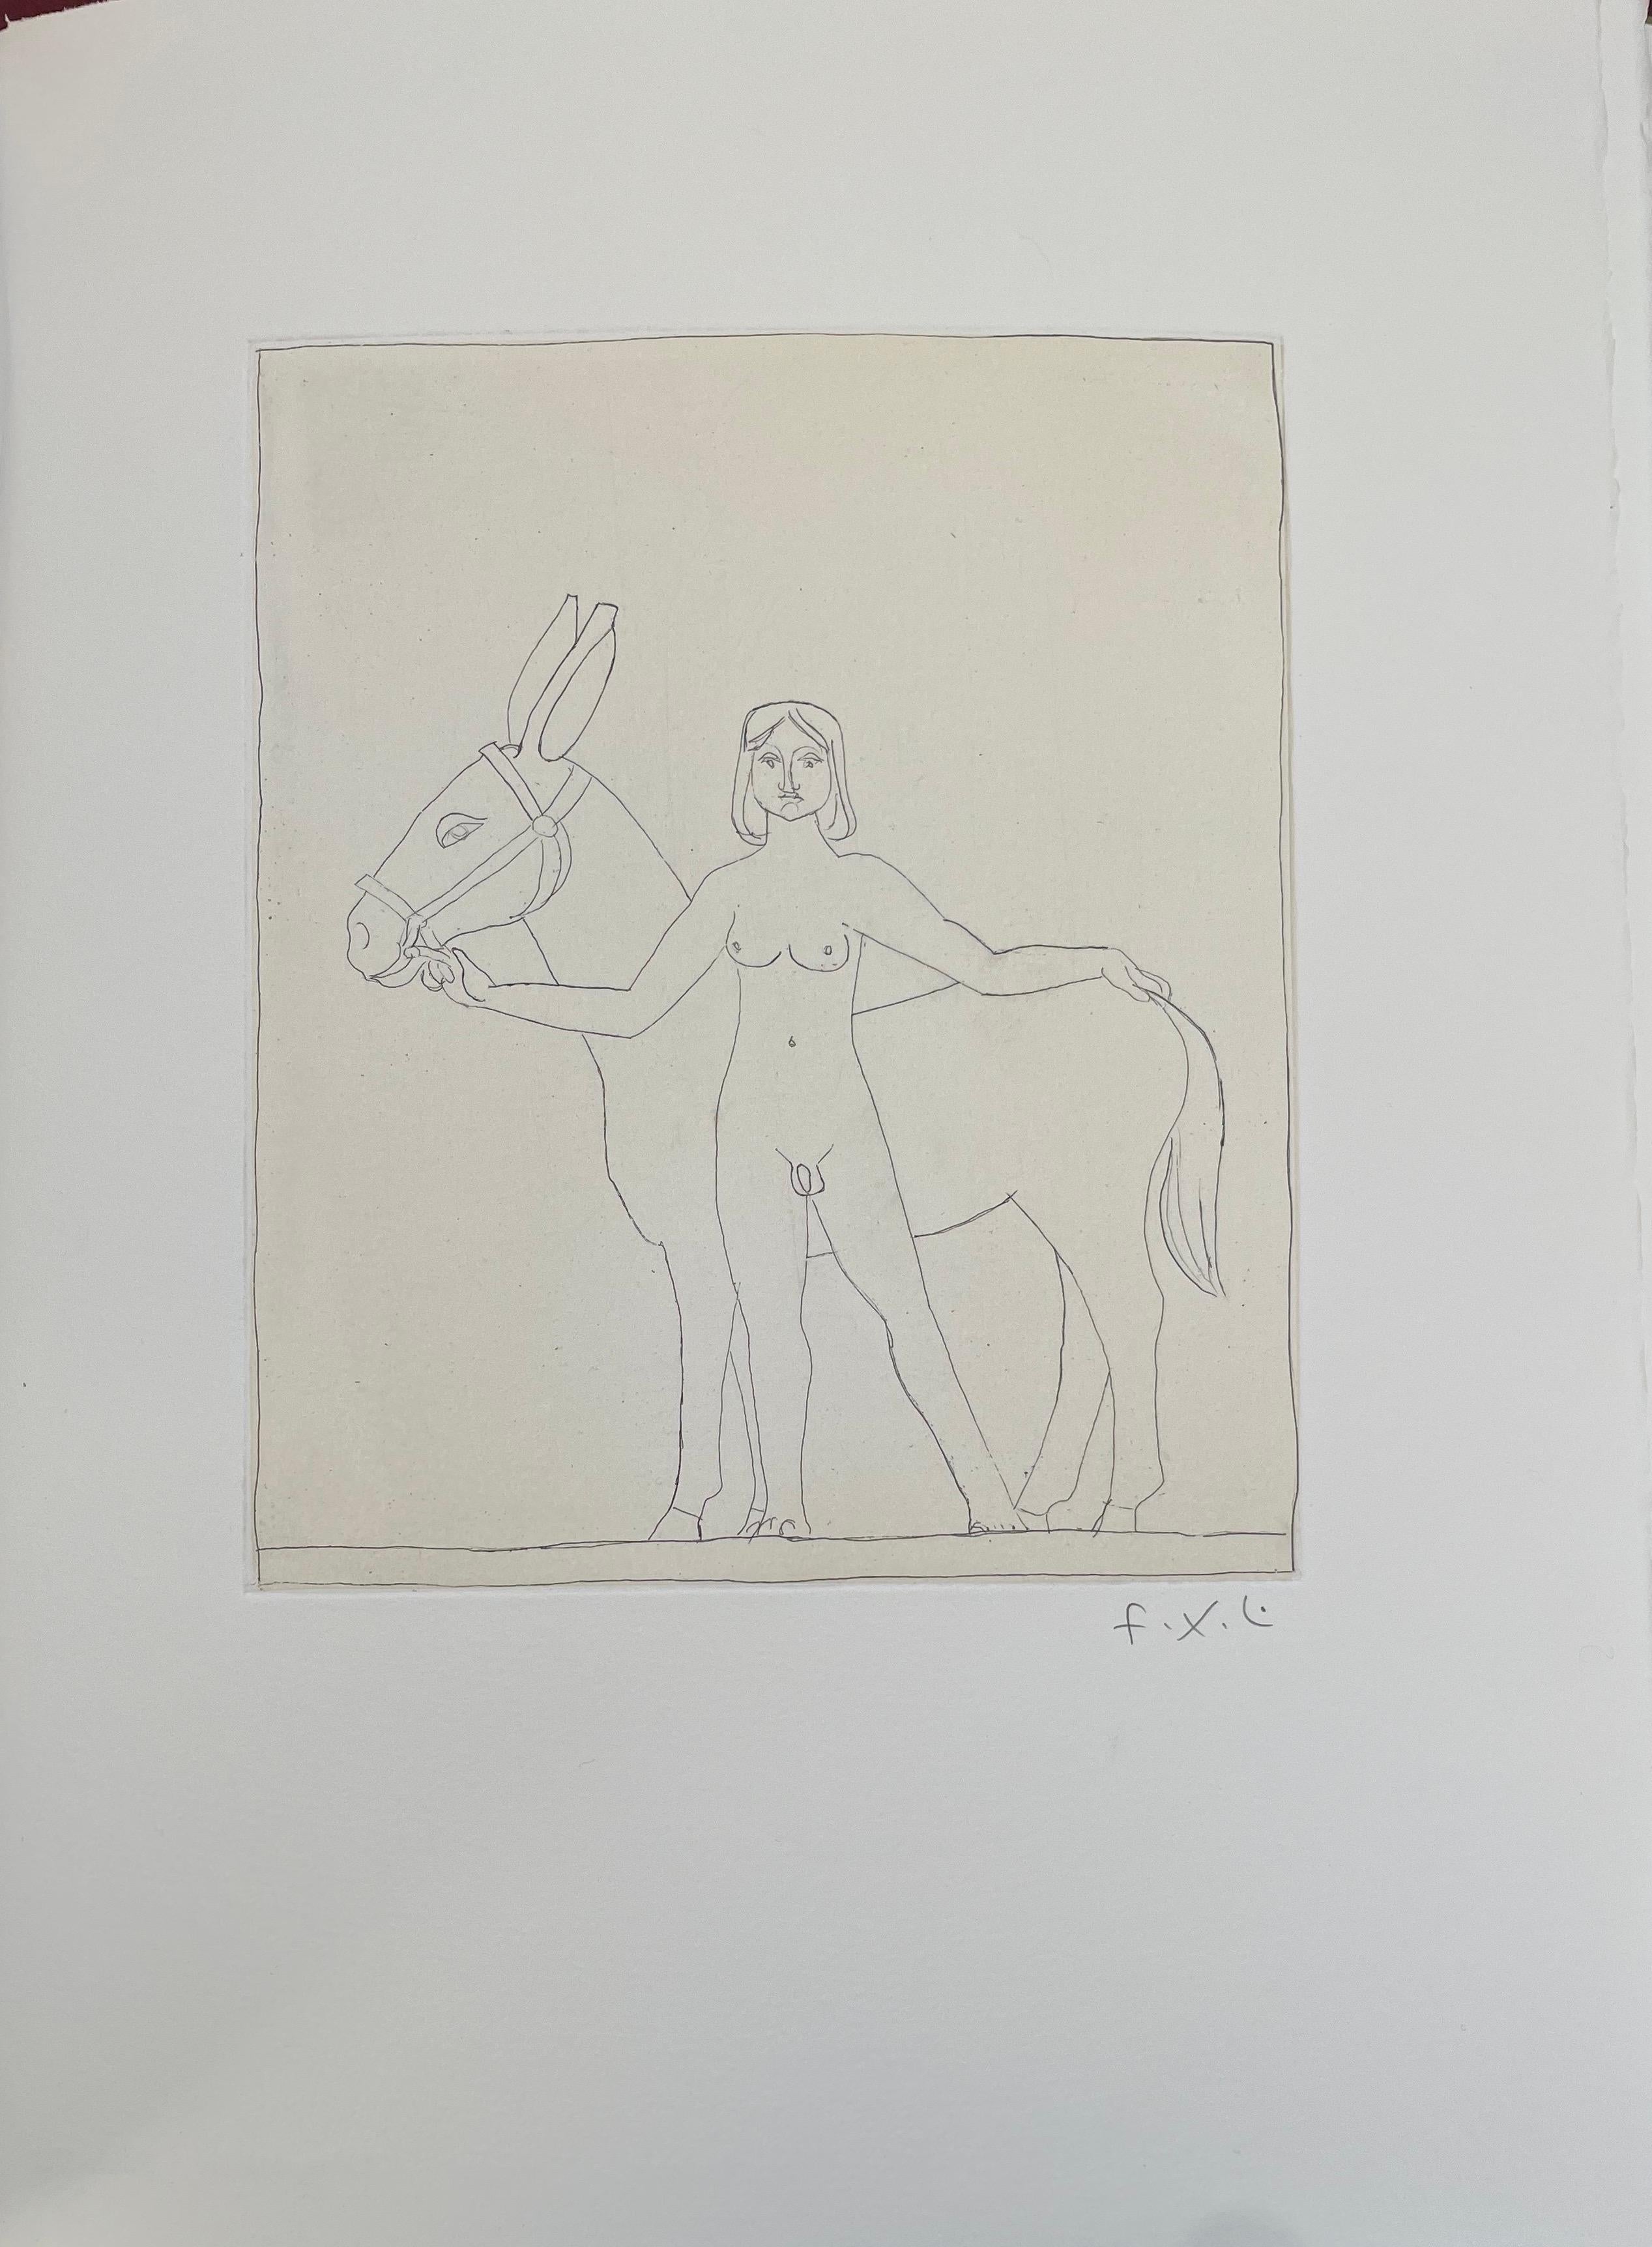 François-Xavier Lalanne (1927-2008) the donkey, 2002.
Techniques: etching on paper, hand signed in pencil by François Xavier Lalanne, in perfect condition.
Dimensions of the paper: 38 x 28 cm (14, 96 x 11 inches).
Dimensions of the print itself: